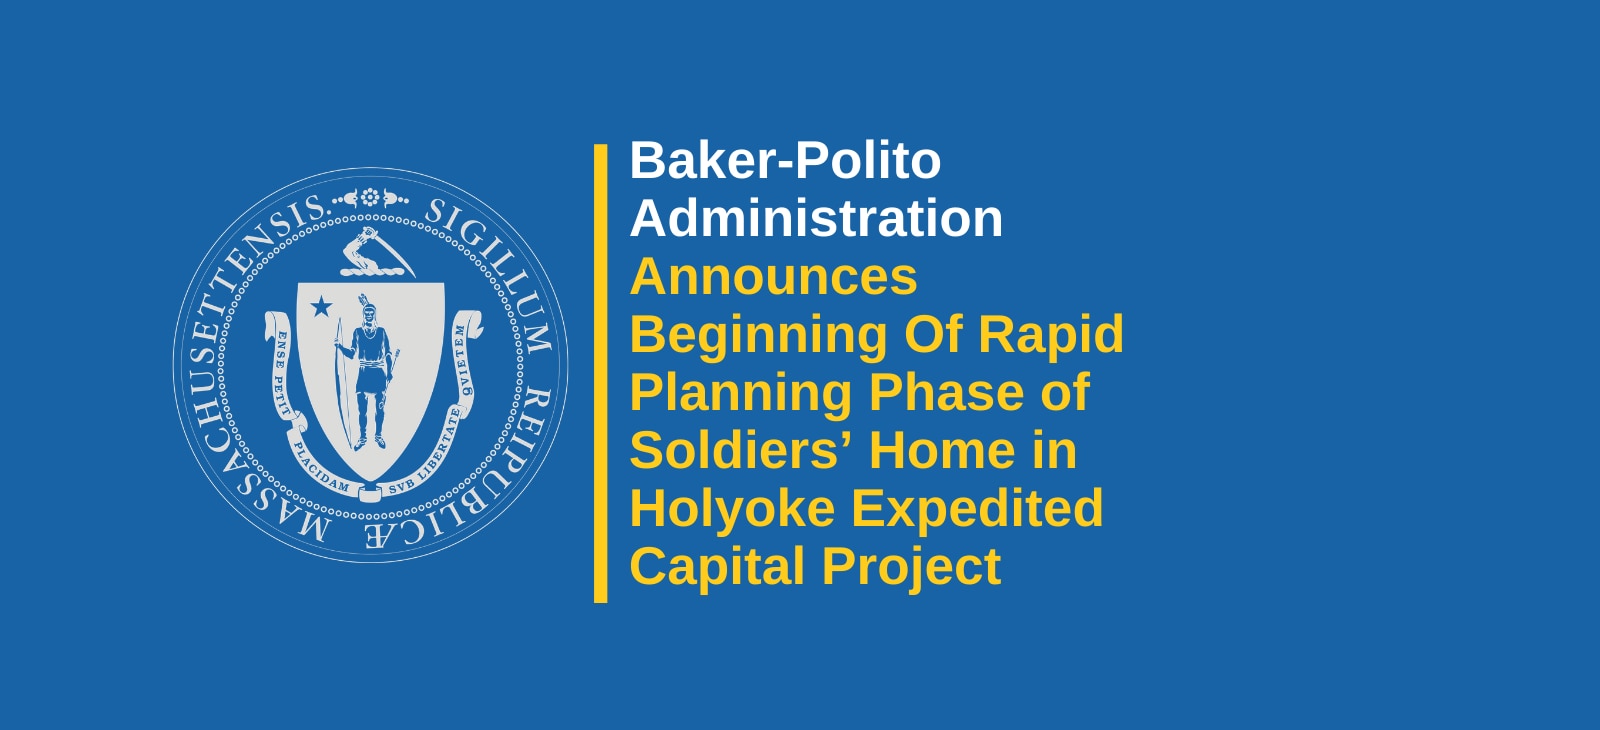 Rapid Planning Phase of Soldiers’ Home in Holyoke Expedited Capital Project Begins